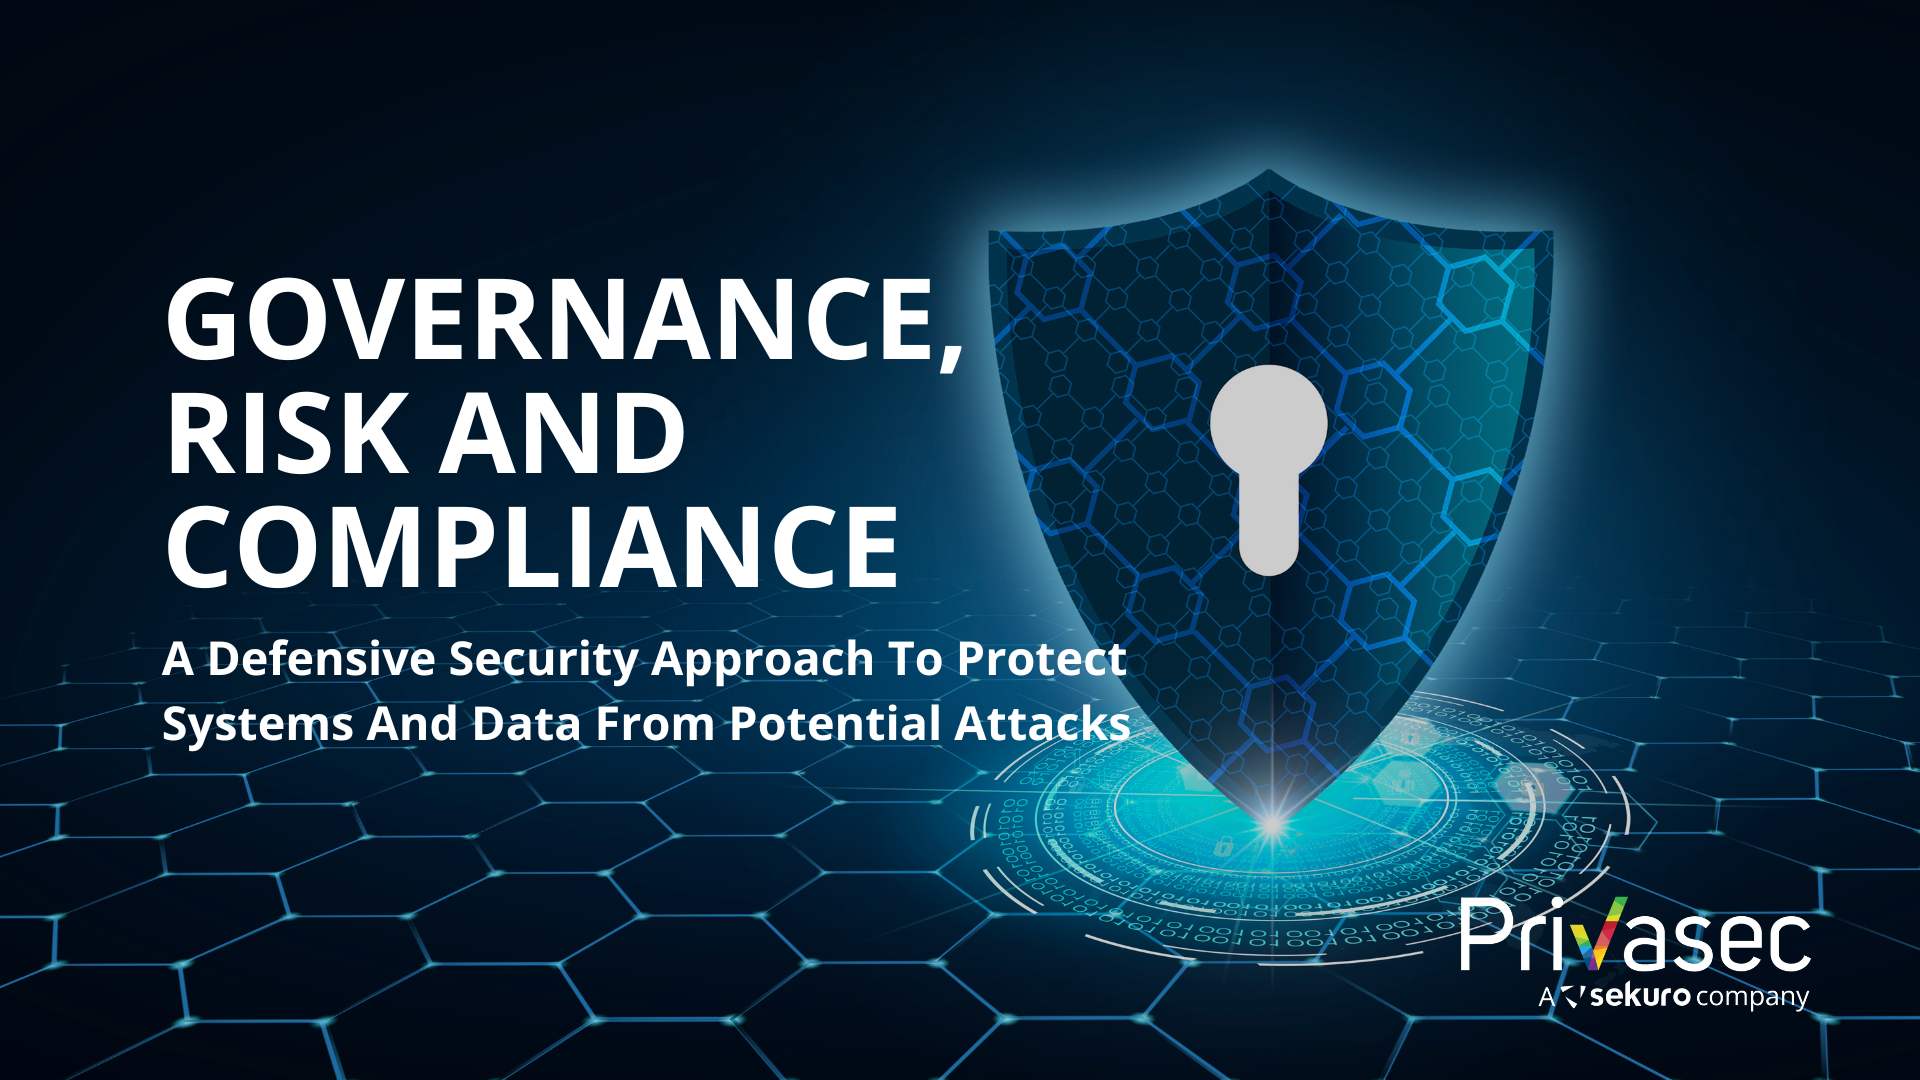 Defensive Security-Governance Risk and Compliance